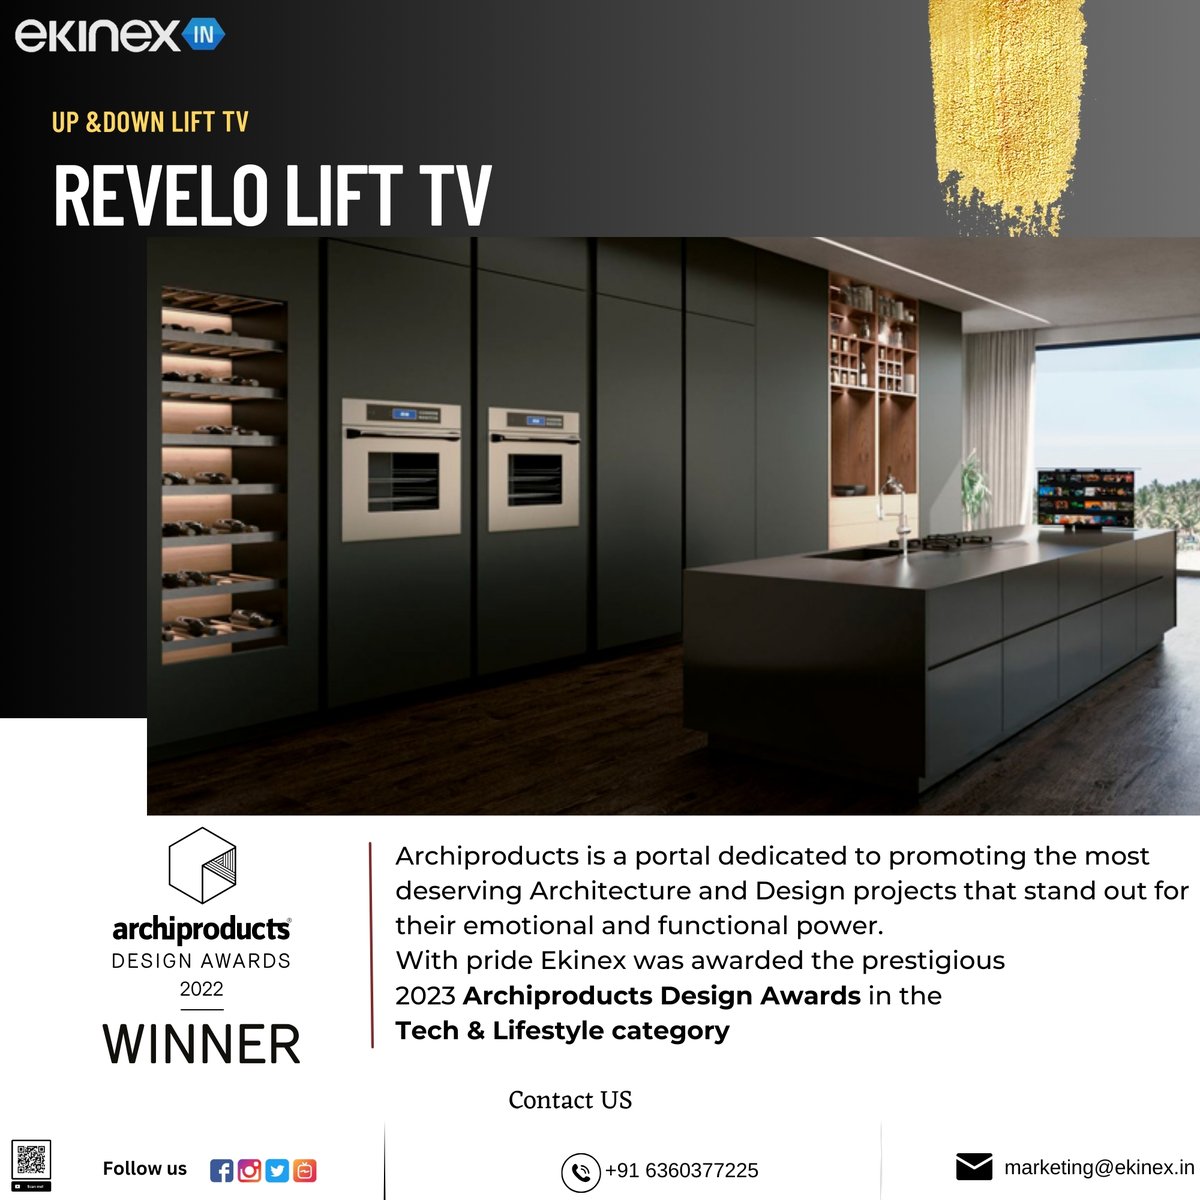 With pride Ekinex was awarded the prestigious 2023 Archiproducts Design Awards in the Tech & Lifestyle category.
#archiproducts #archiproductsdesignawards #ADA2023 #revelo #underbedlift #tv #domotic  #homeautomation #control4 #switches #hiddentv #knx #interiordesign   #tvlift